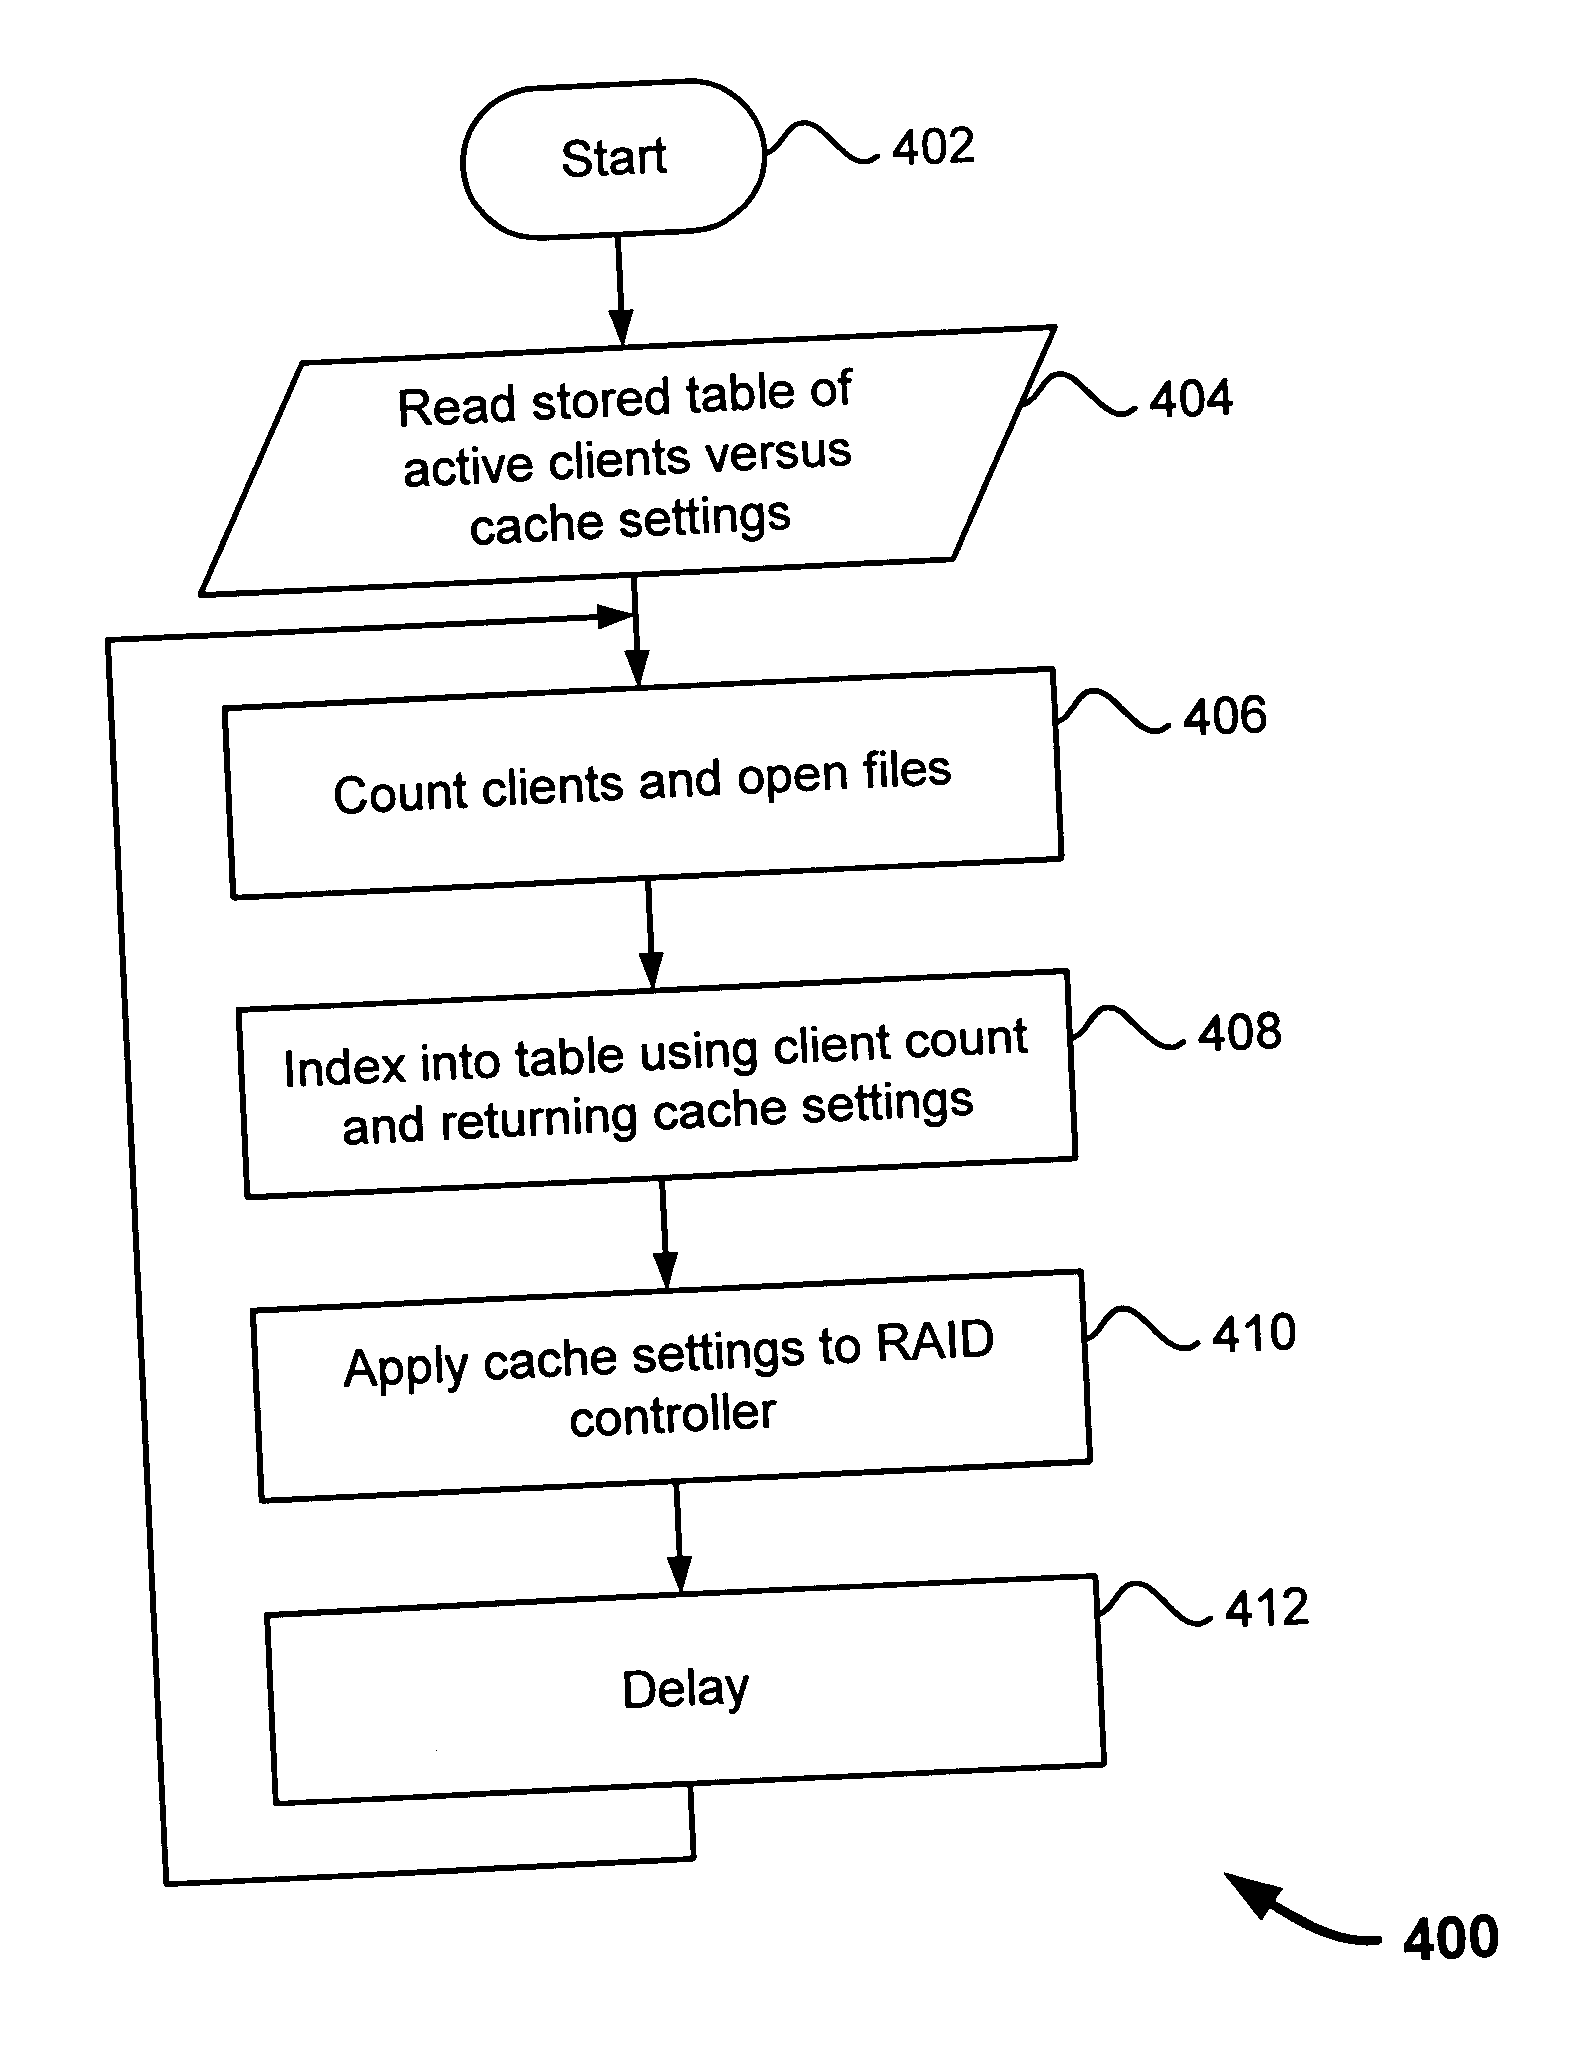 Dynamically varying a raid cache policy in order to optimize throughput